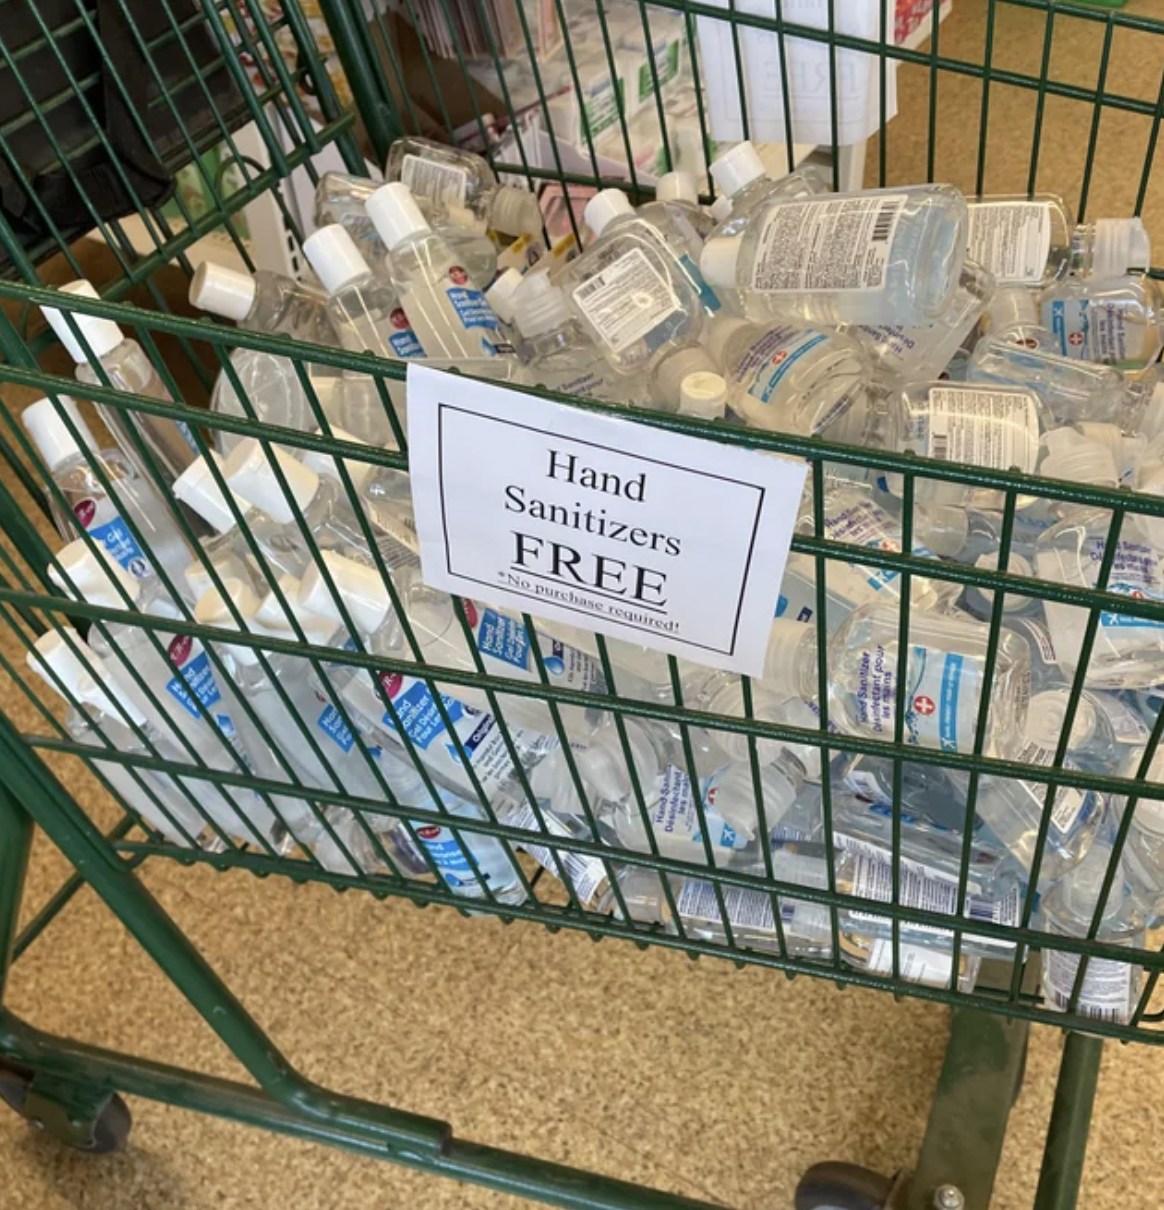 This dollar store is giving away their hand sanitizer stock.